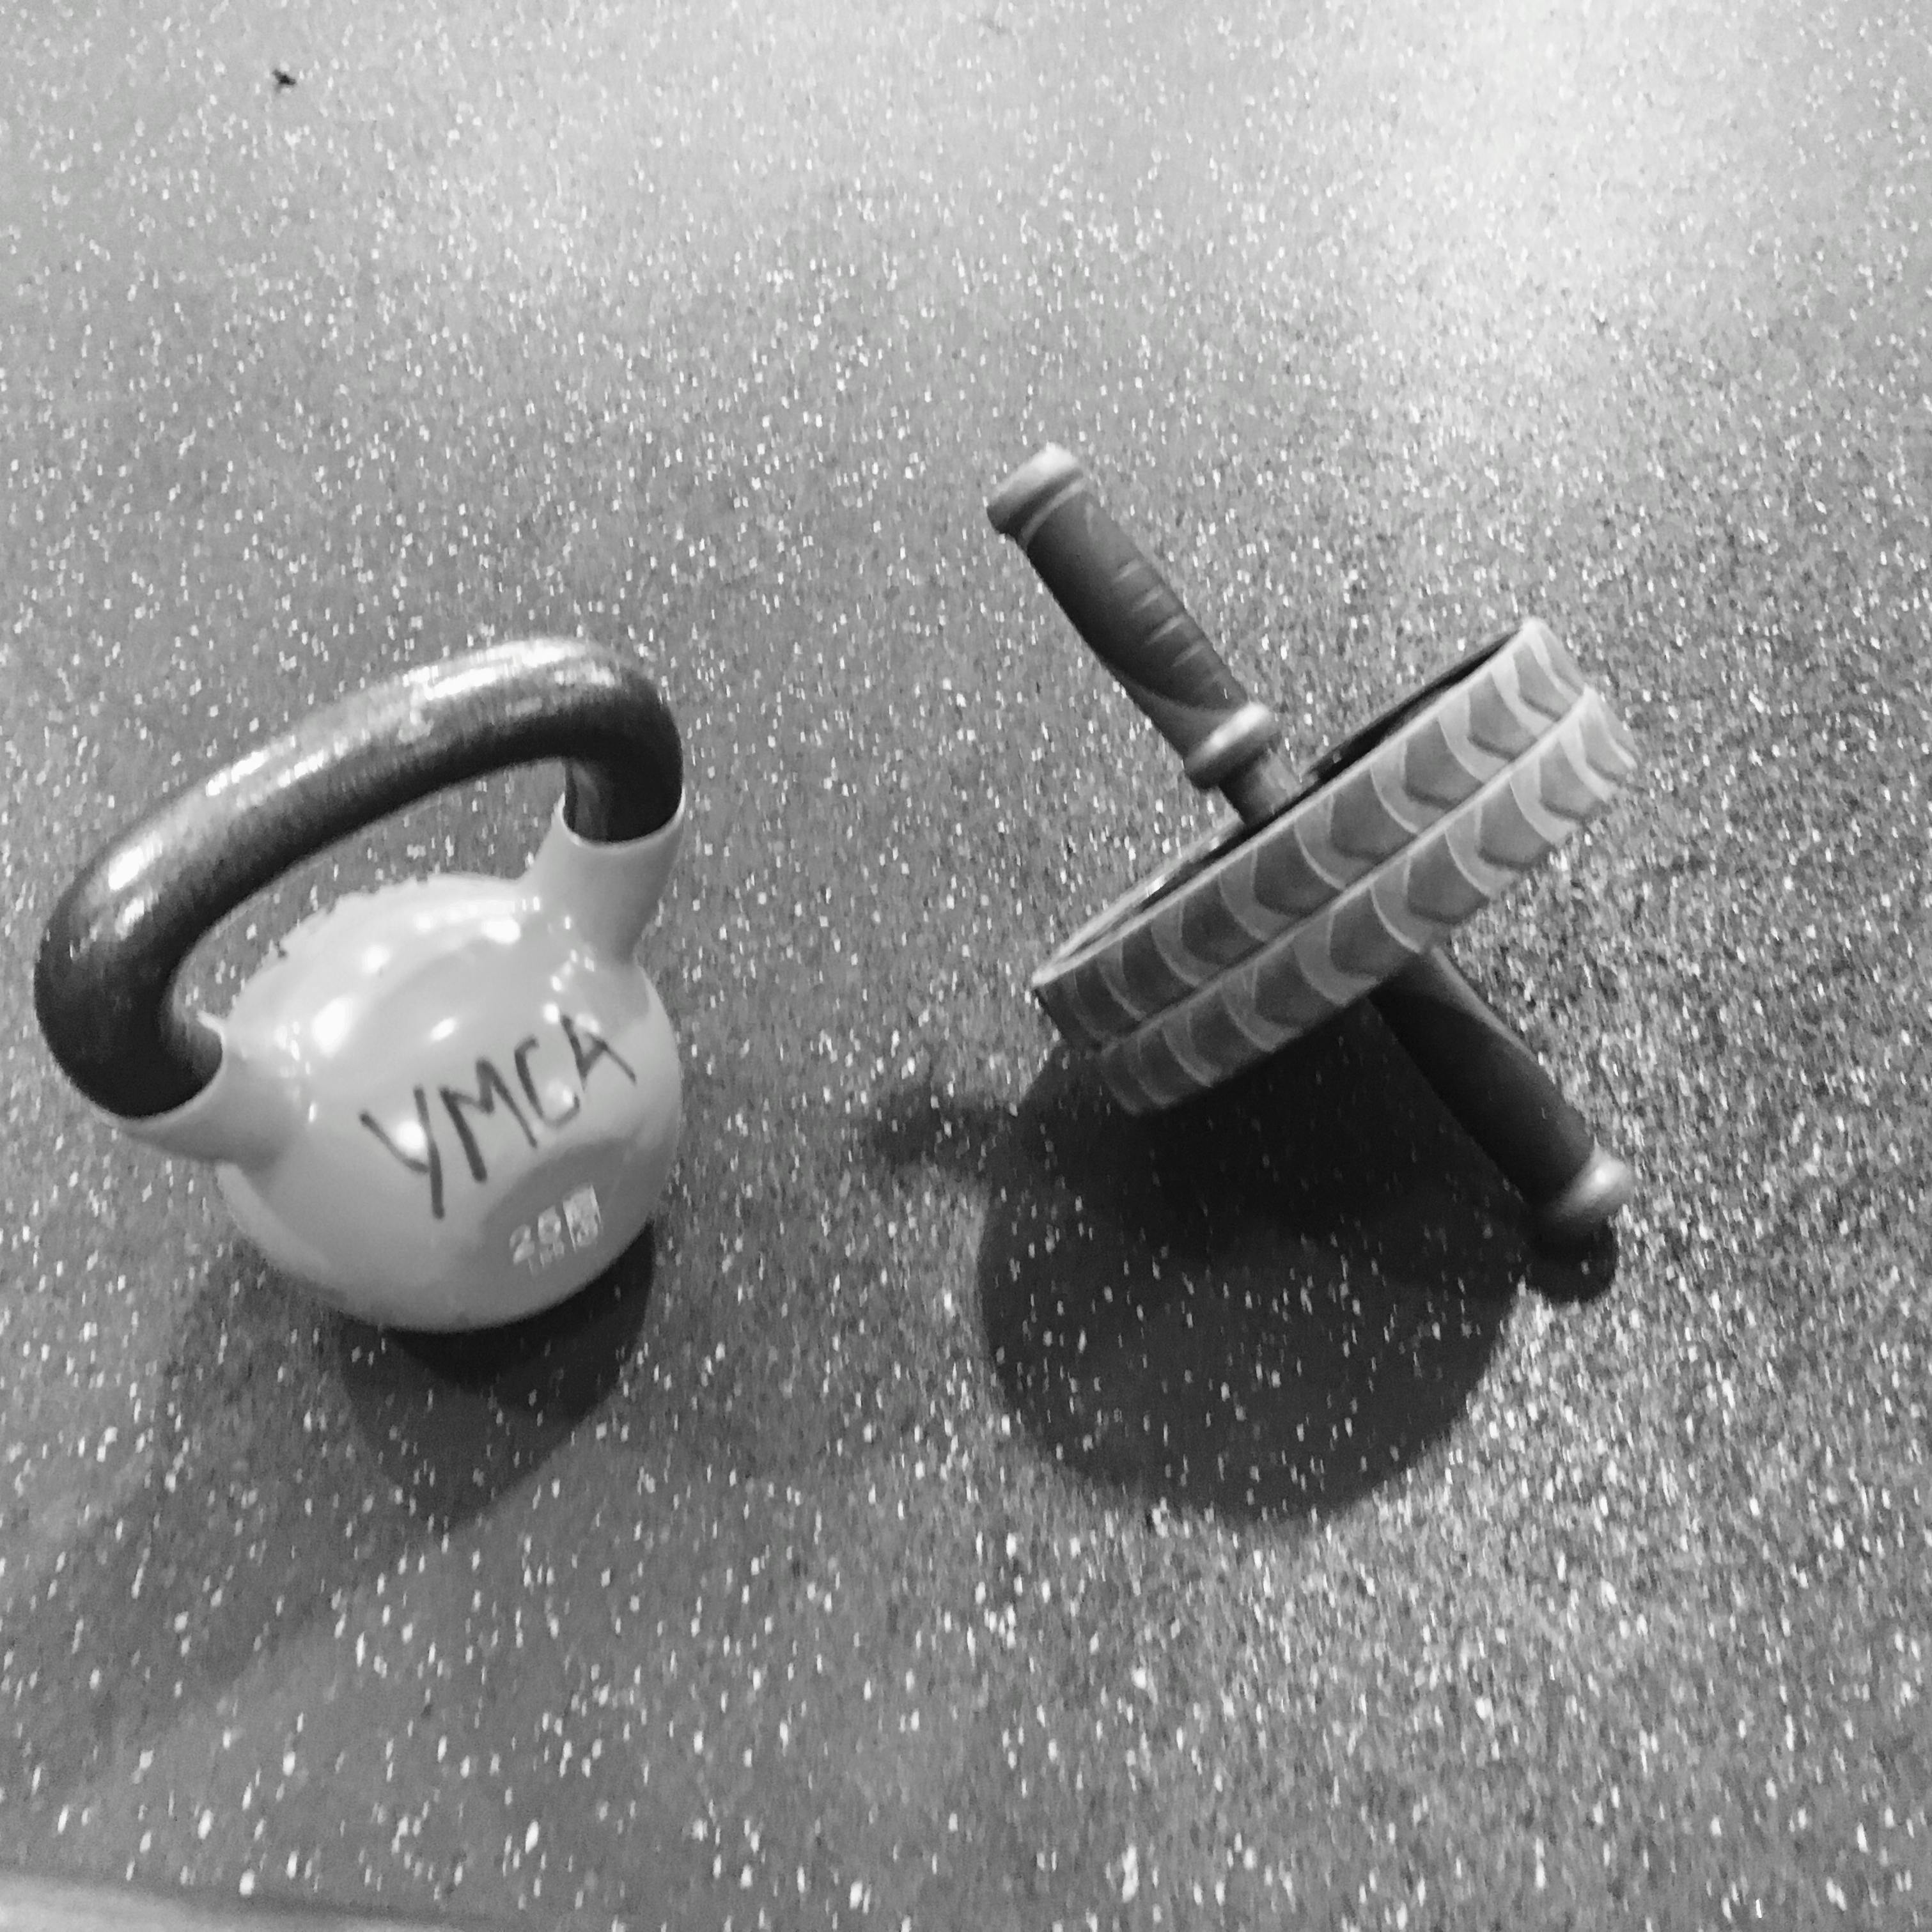 Free stock photo of #fitness, #kettlebell, #workout equipment